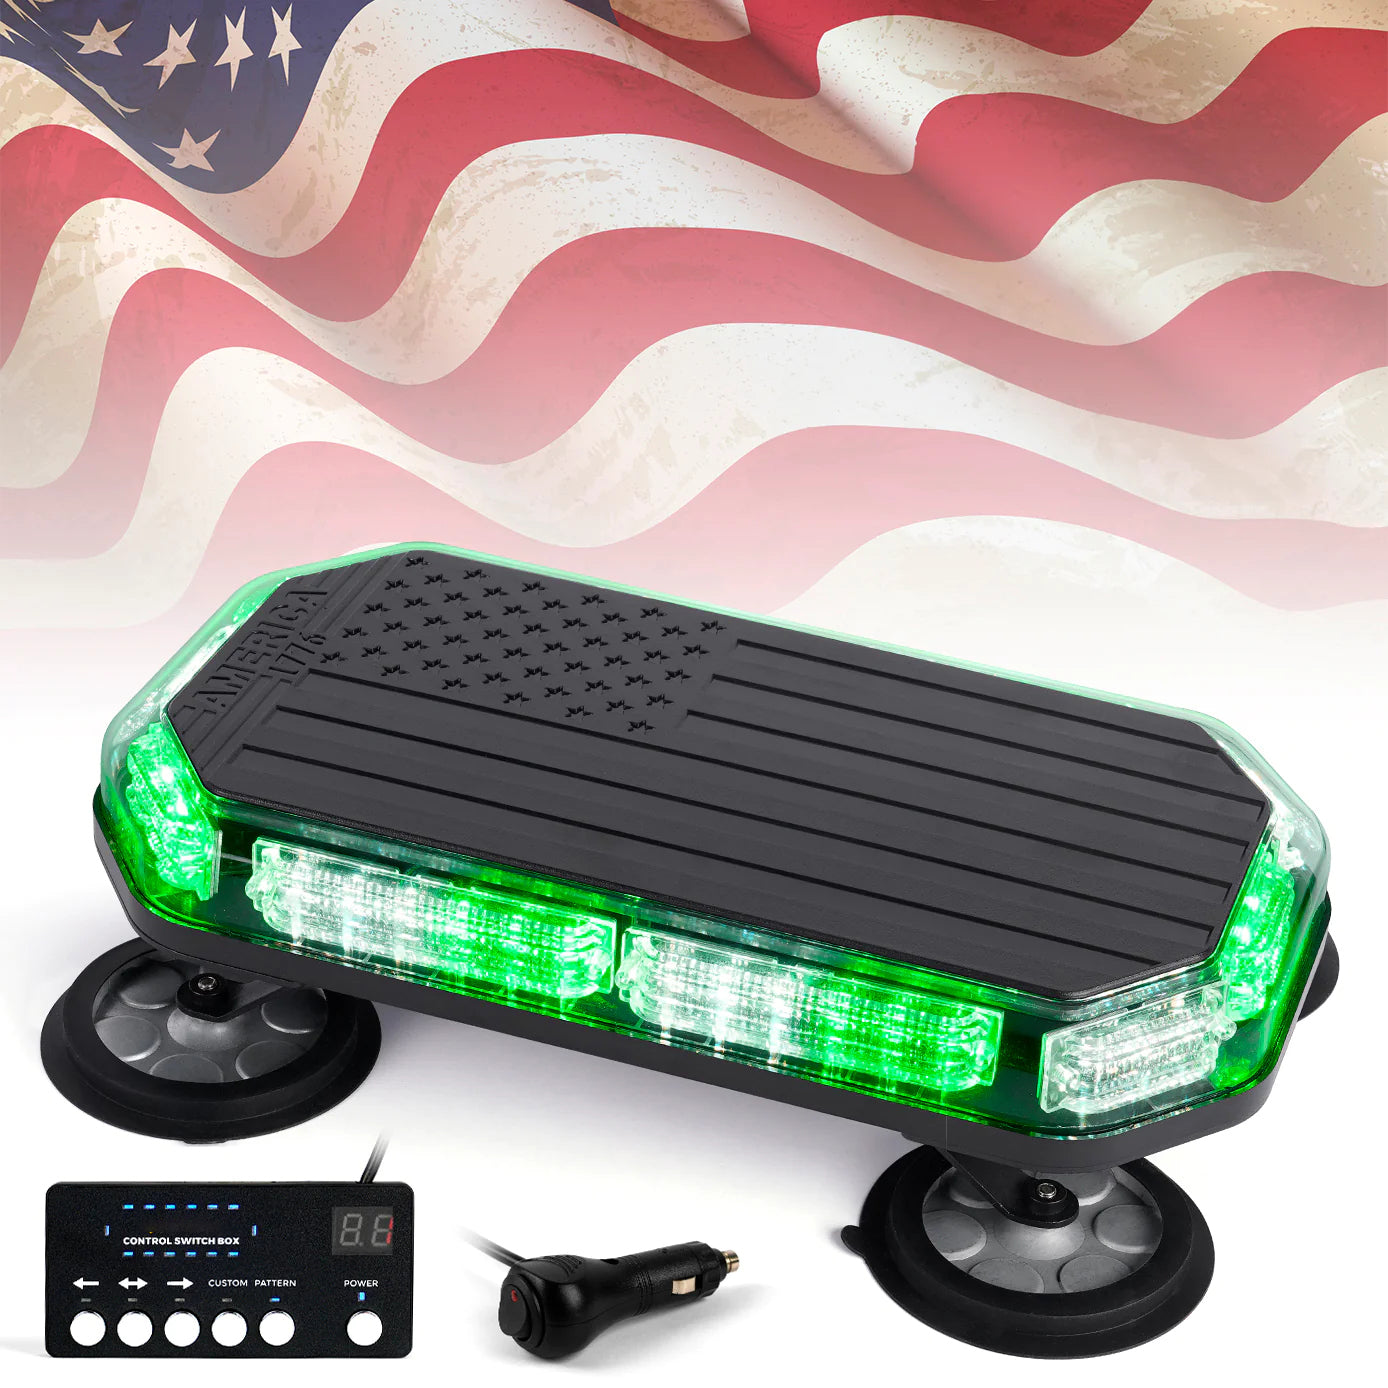 LED Rooftop Strobe Light with American Flag Design